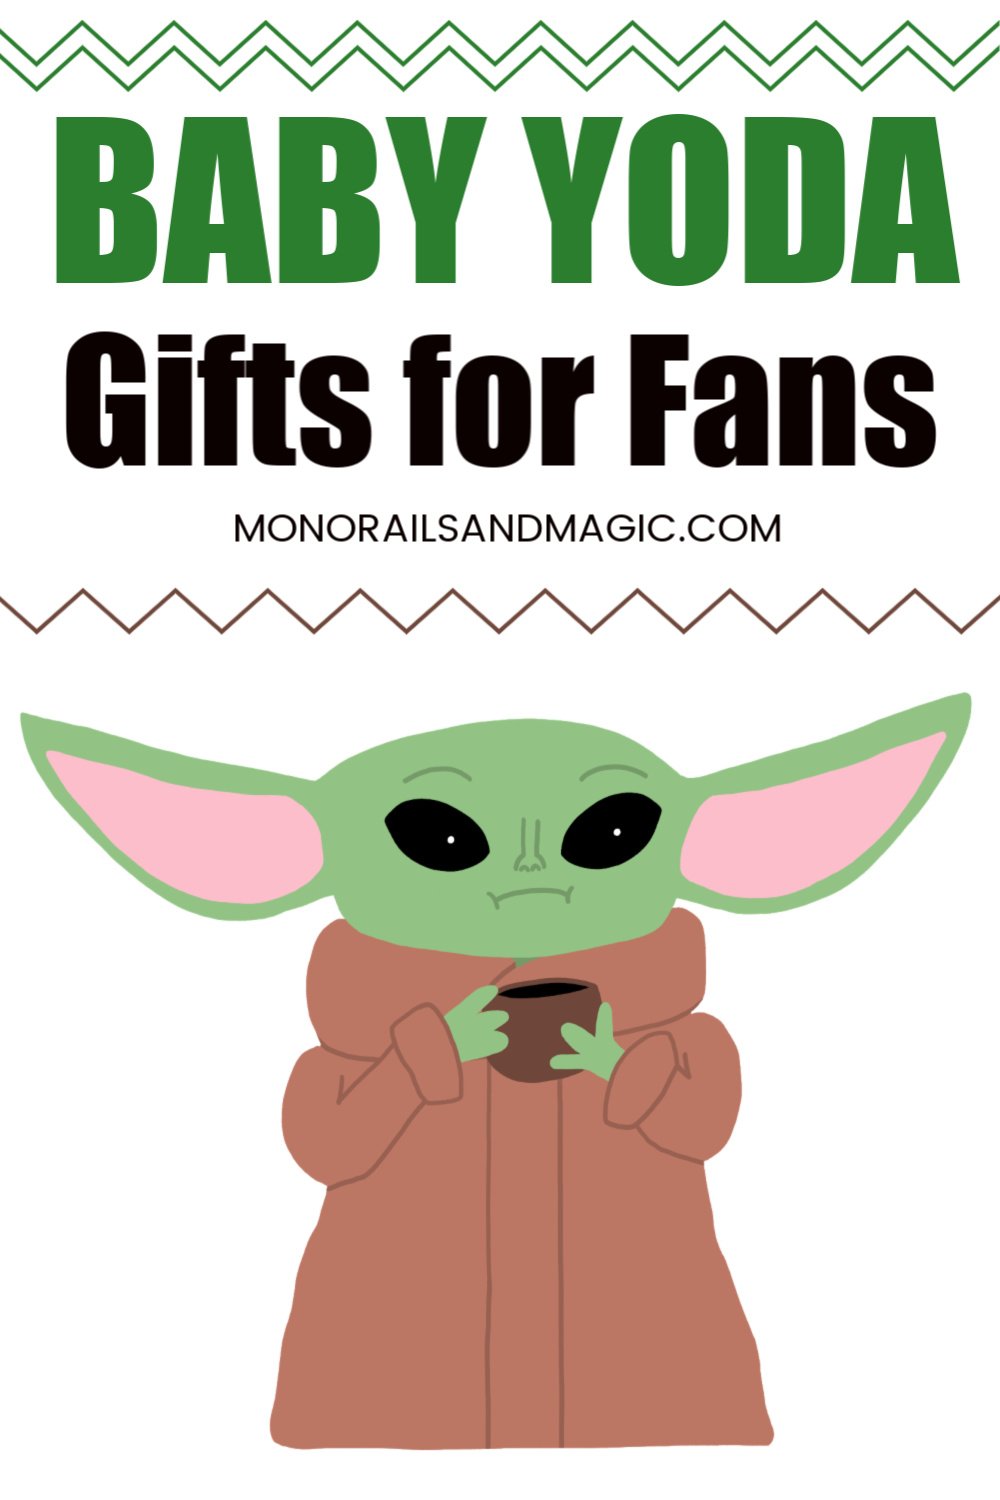 Fun gift ideas for Baby Yoda fans of all ages.